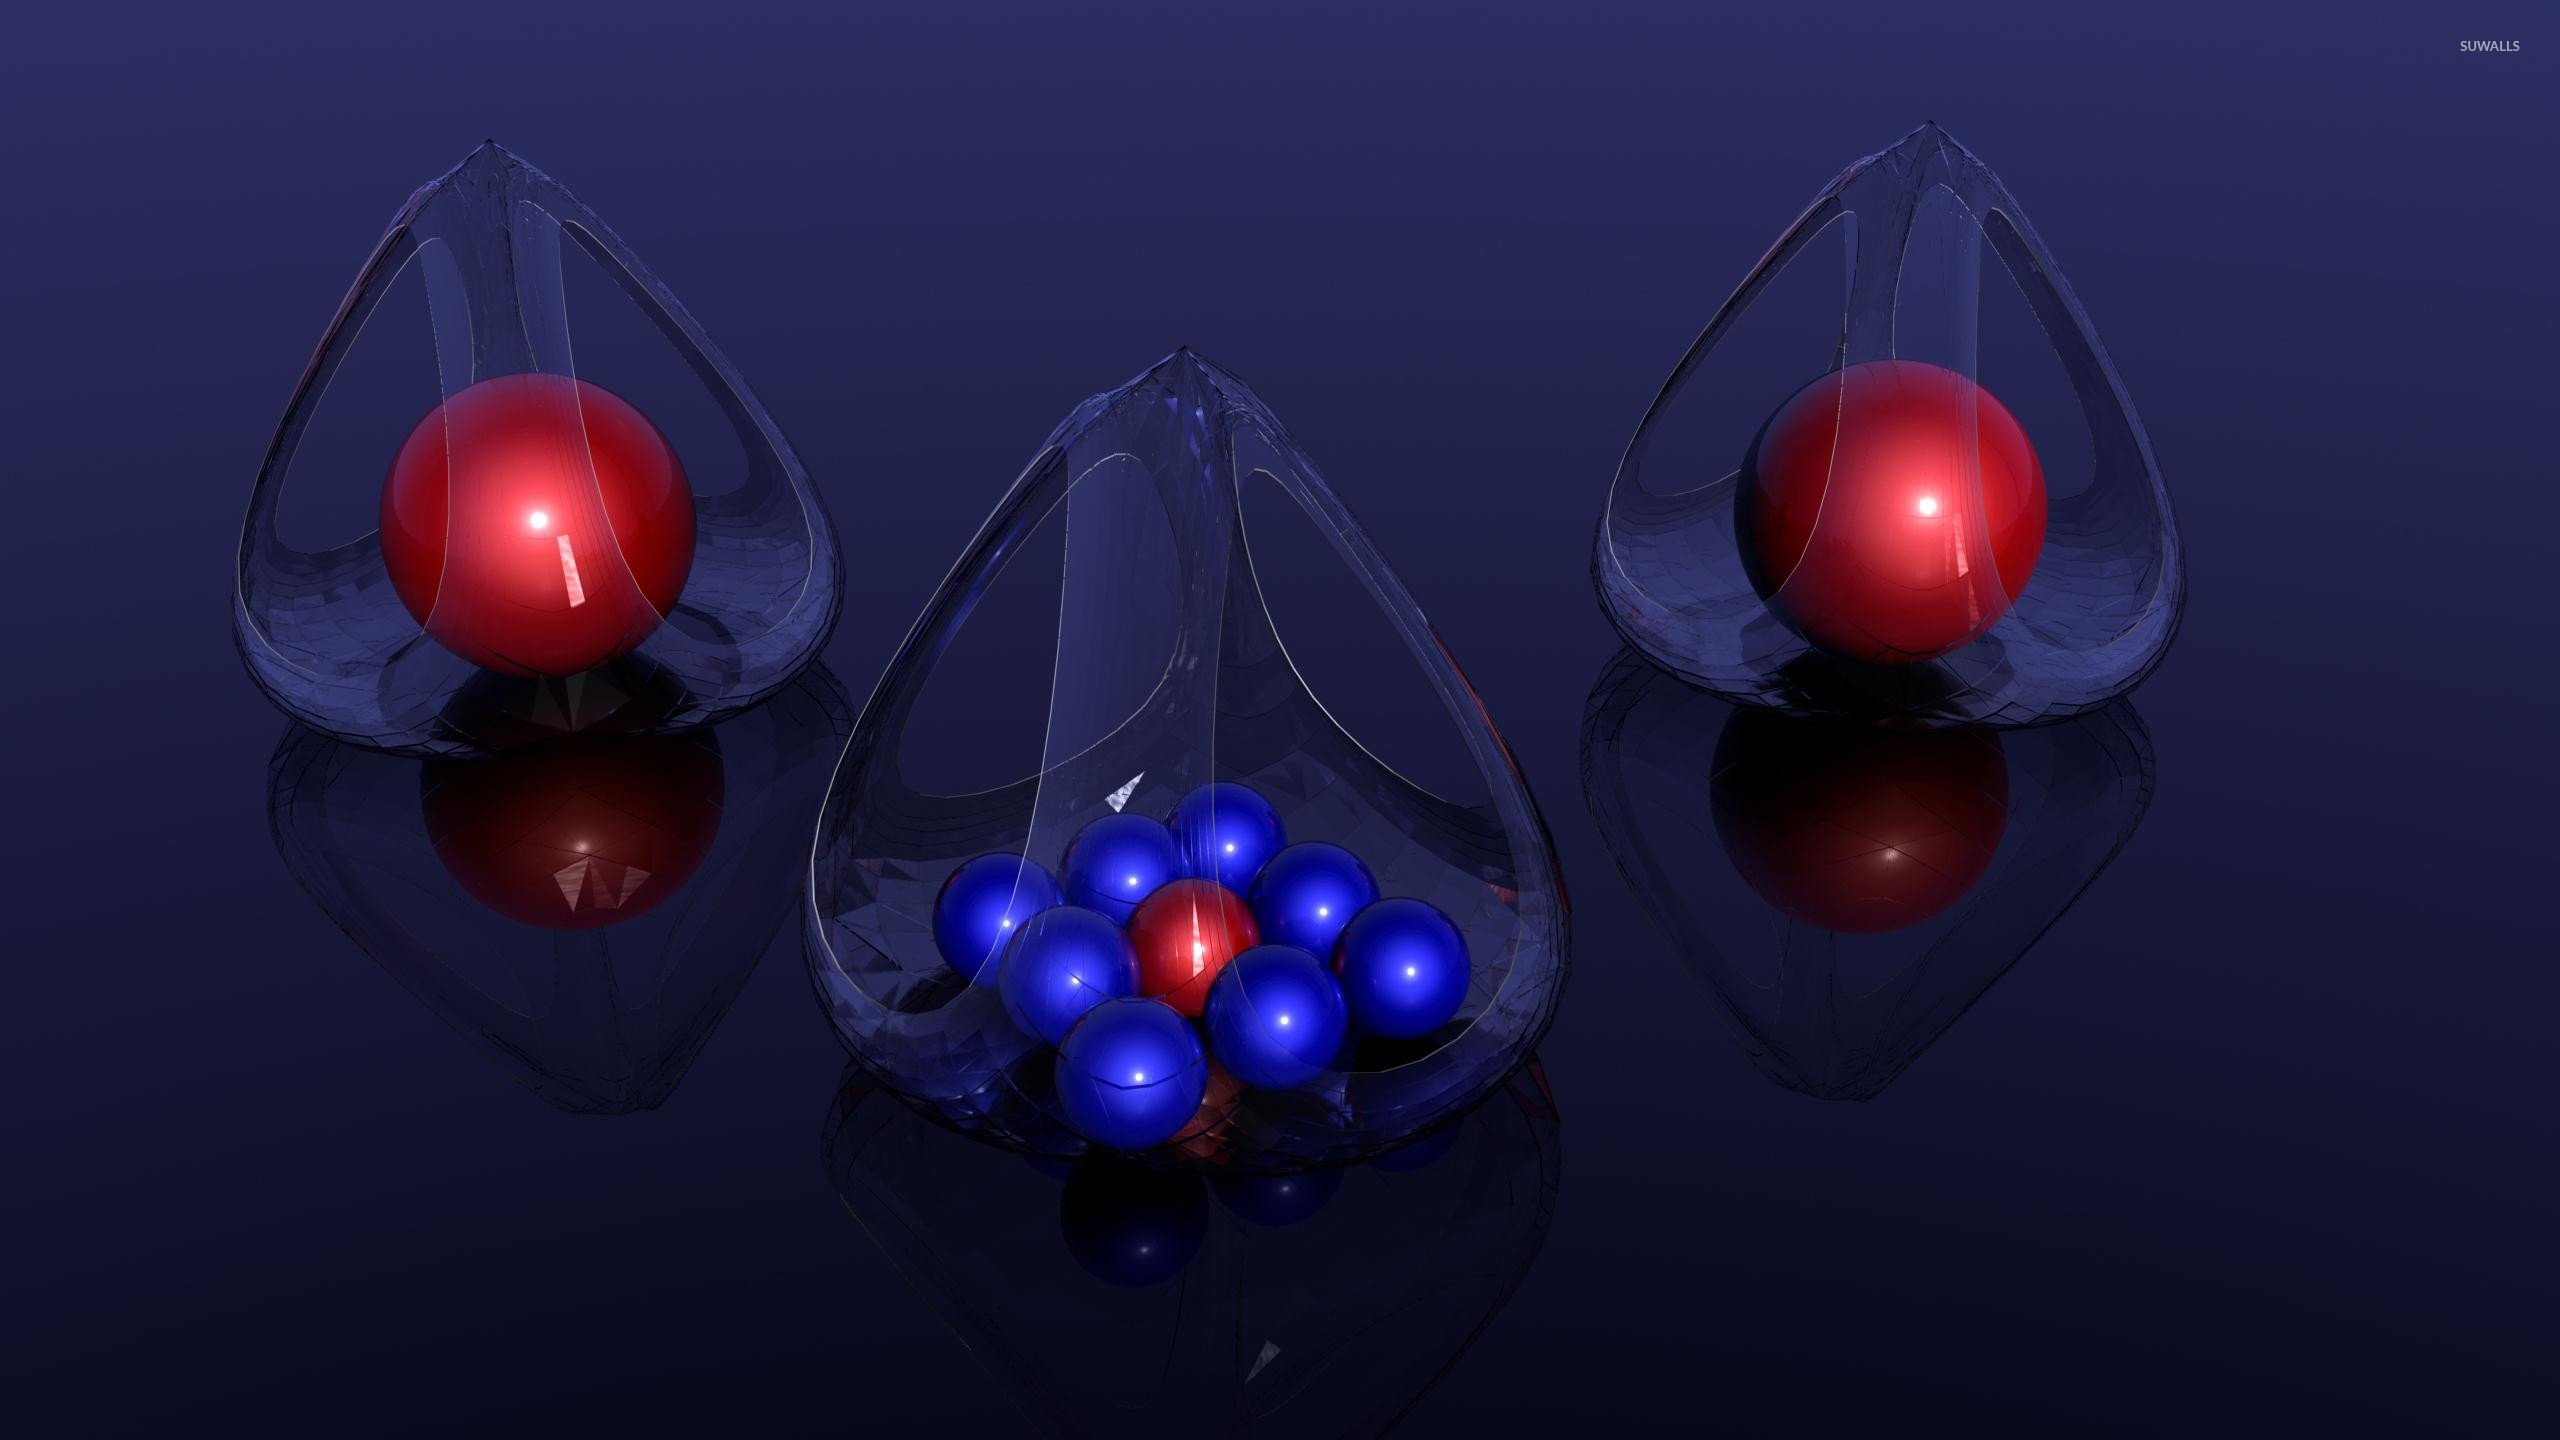 2560x1440 Red and blue orbs in glass baskets wallpaper